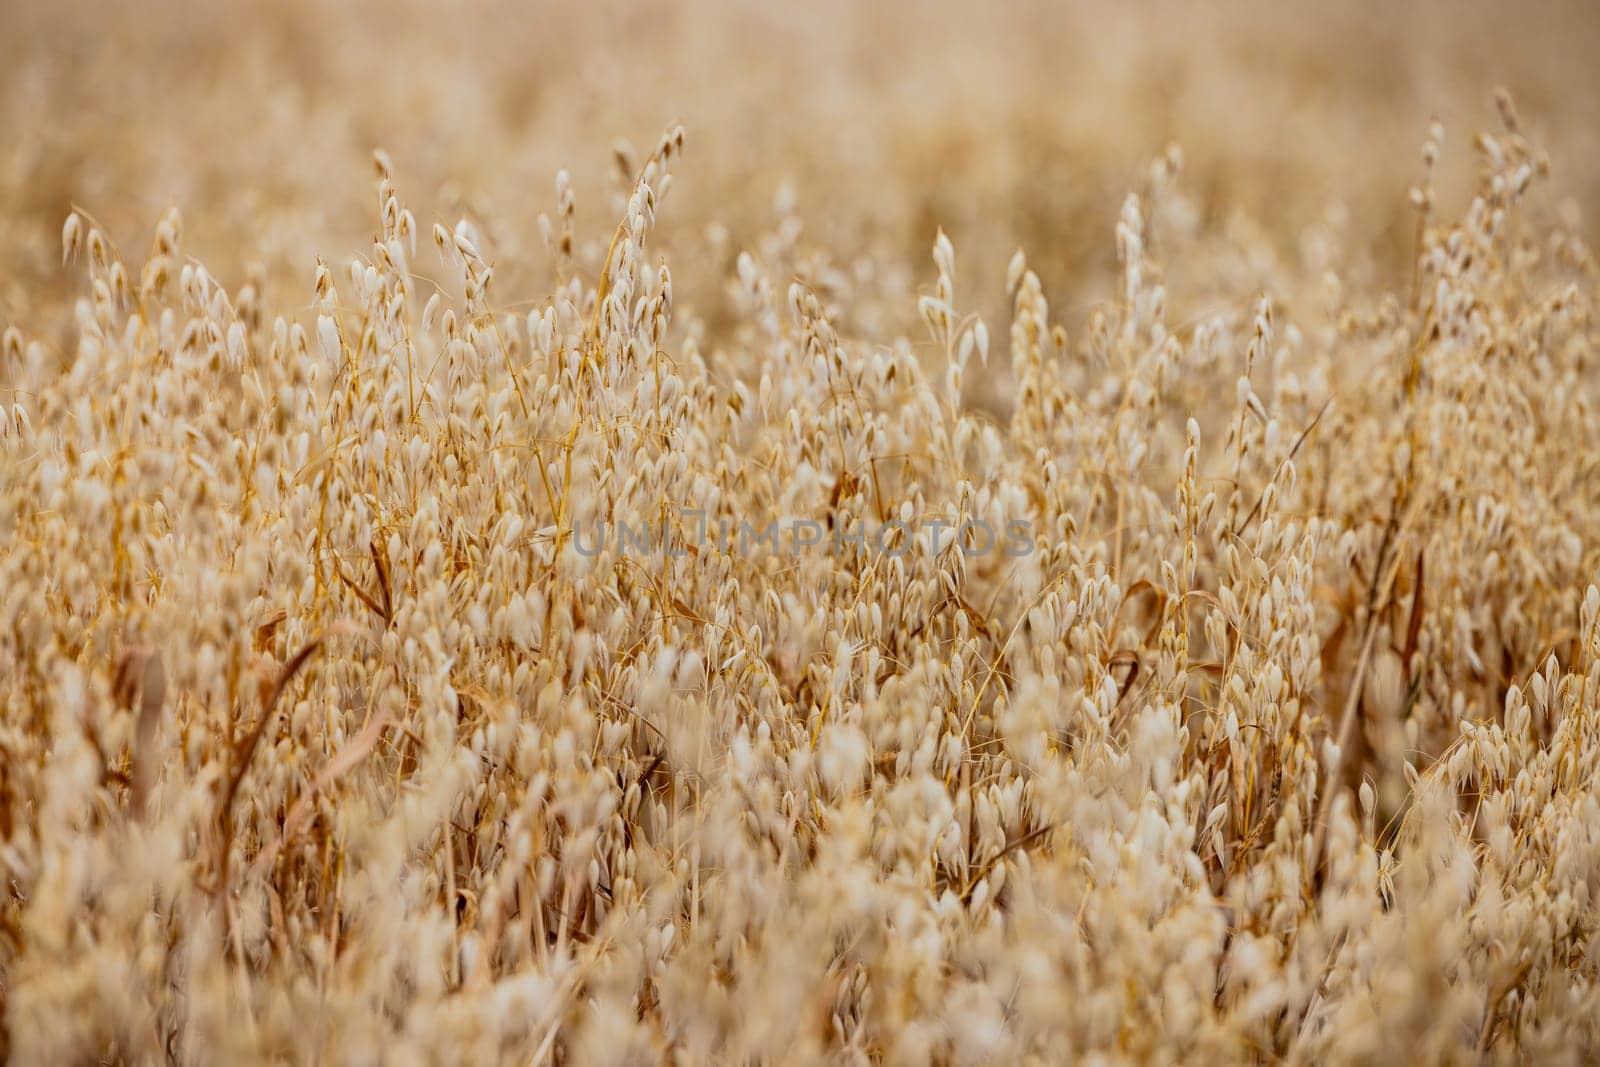 Withered oat plants with ripe panicles in an oat field exposed to the horizon